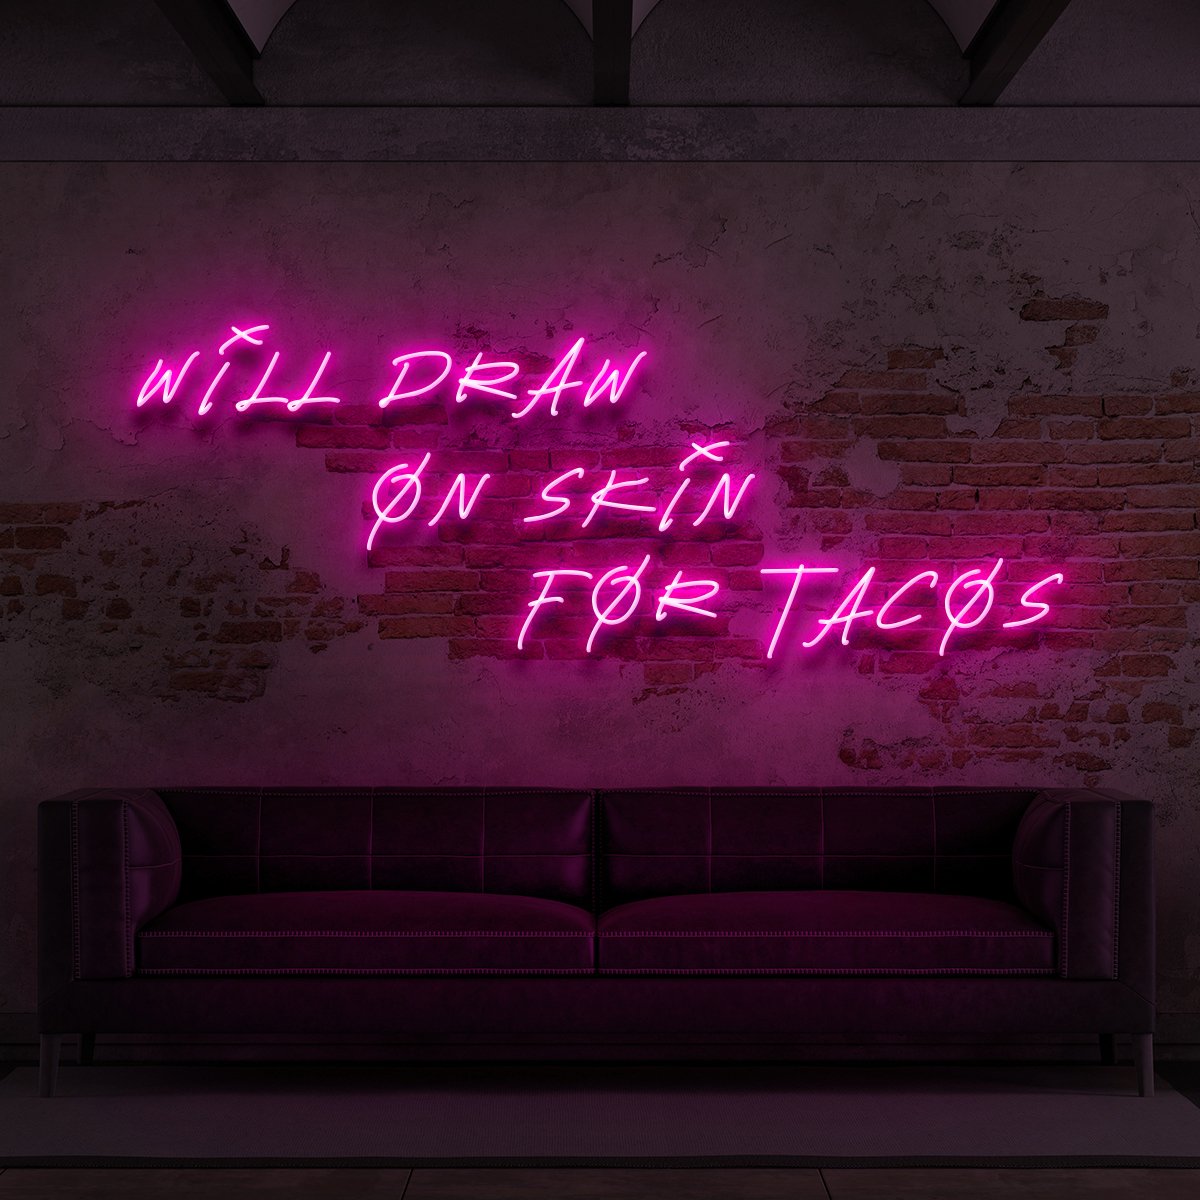 "Will Draw On Skin For Tacos" Neon Sign for Tattoo Parlours